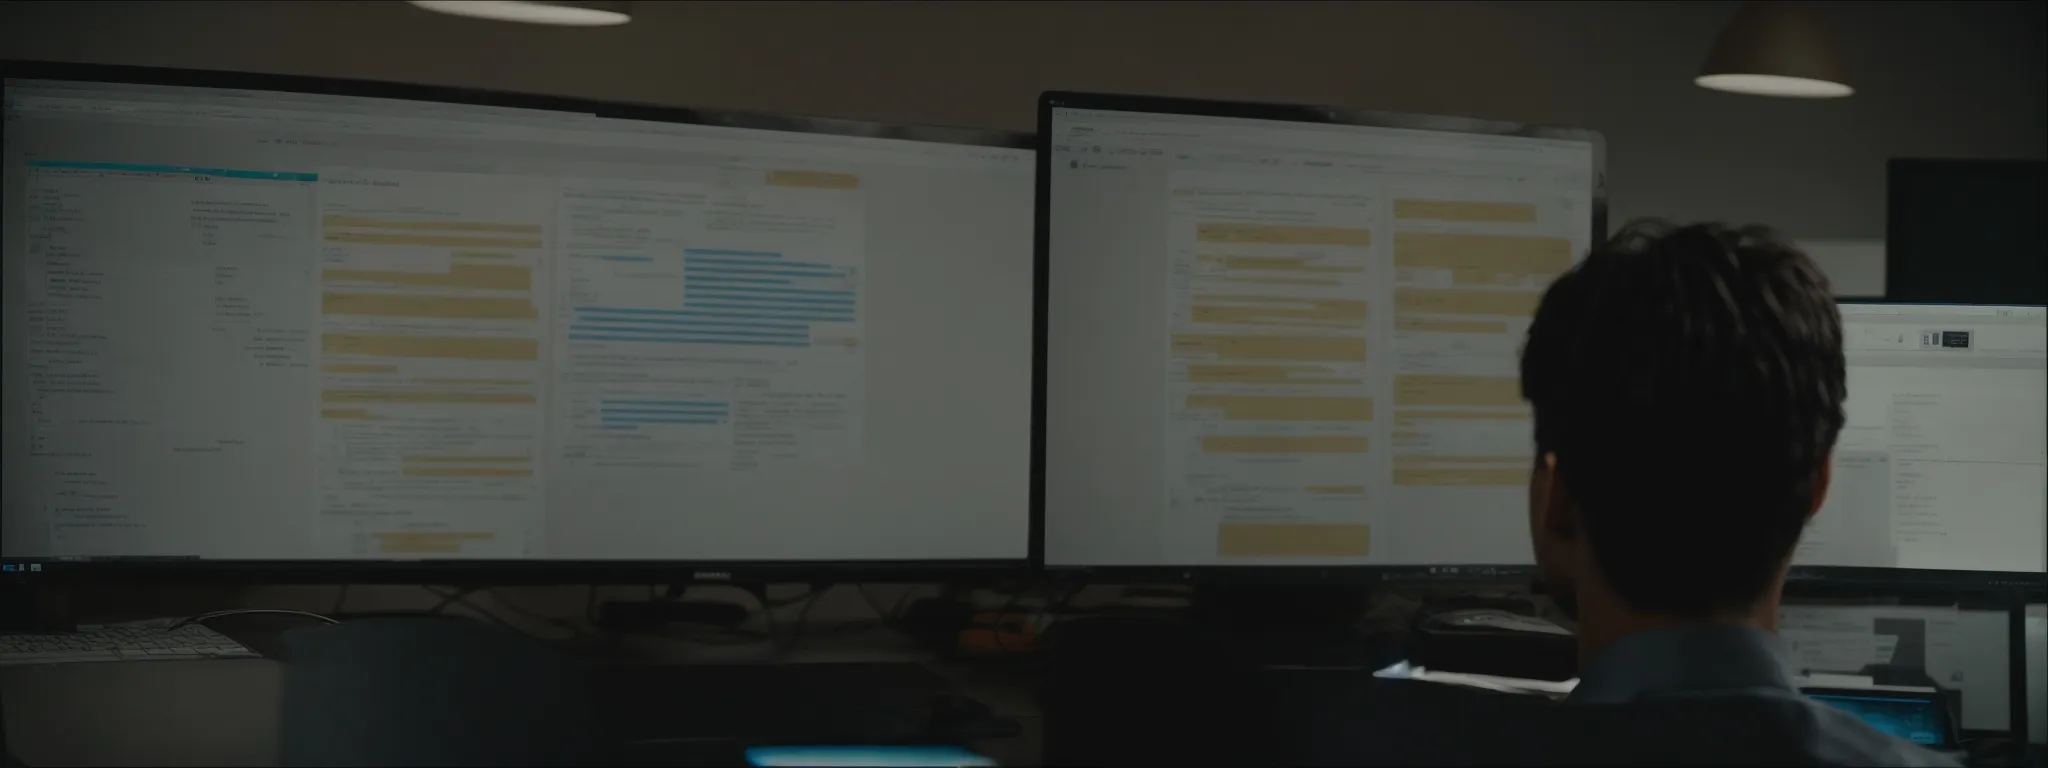 a web developer reviews a sitemap structure on a computer screen amidst a neat office setting.